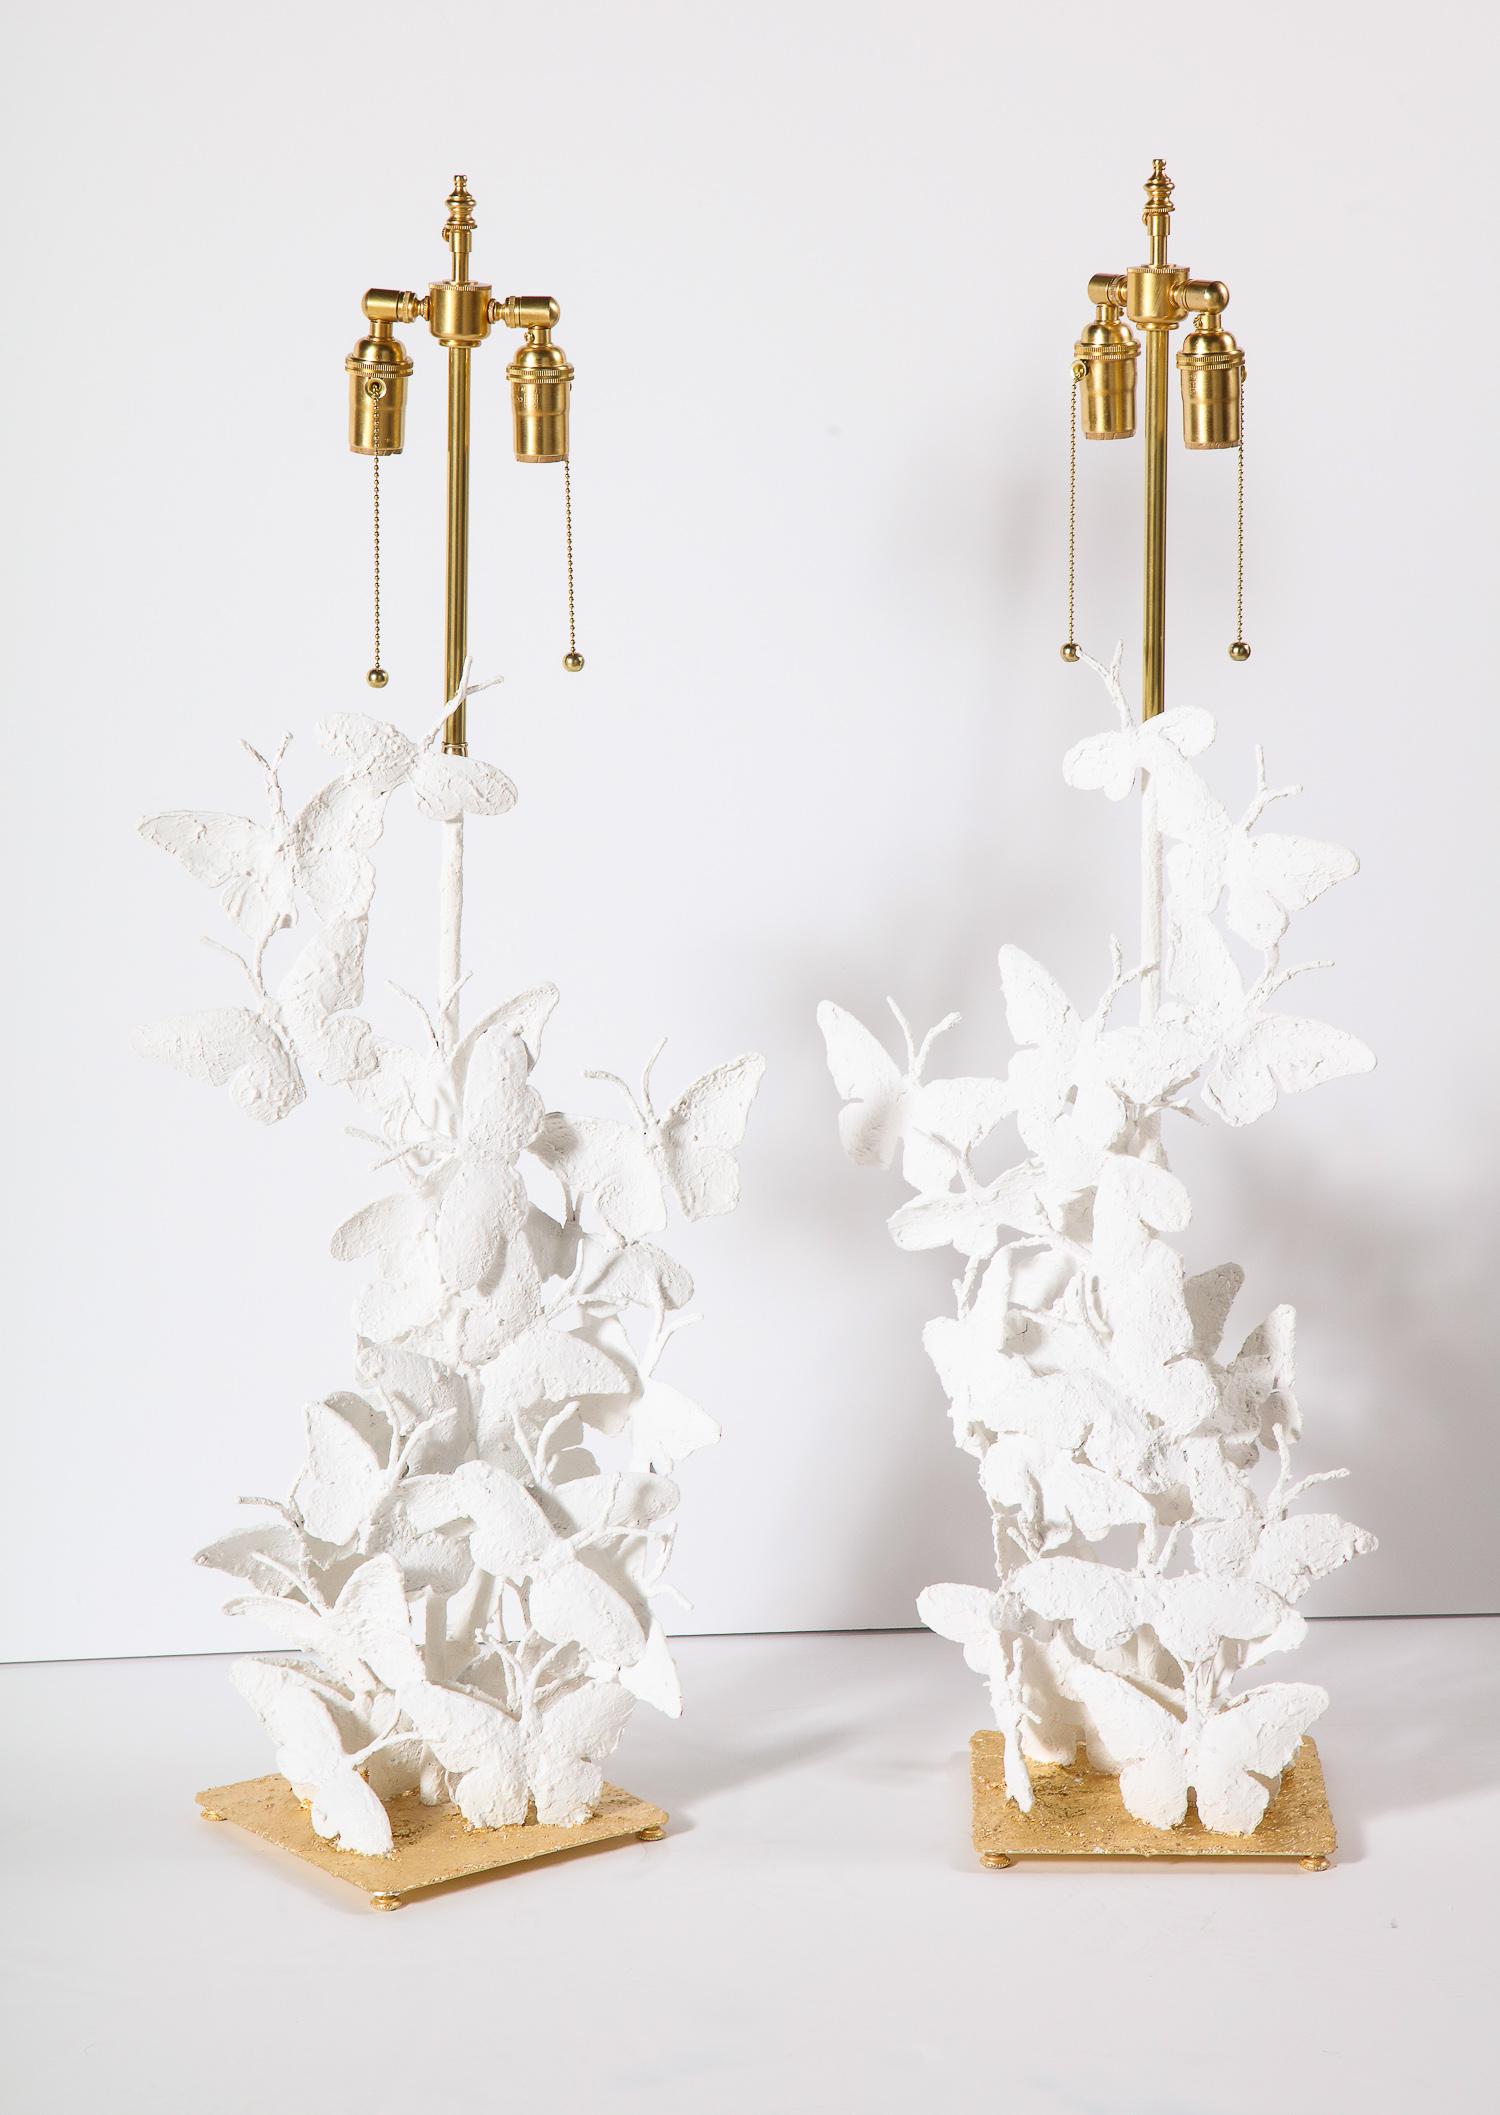 Decorative pair of table lamps with an ocean of butterflies. The lamps are made of metal with design of plaster. Base is covered in gold leaf. Brass lamp parts.